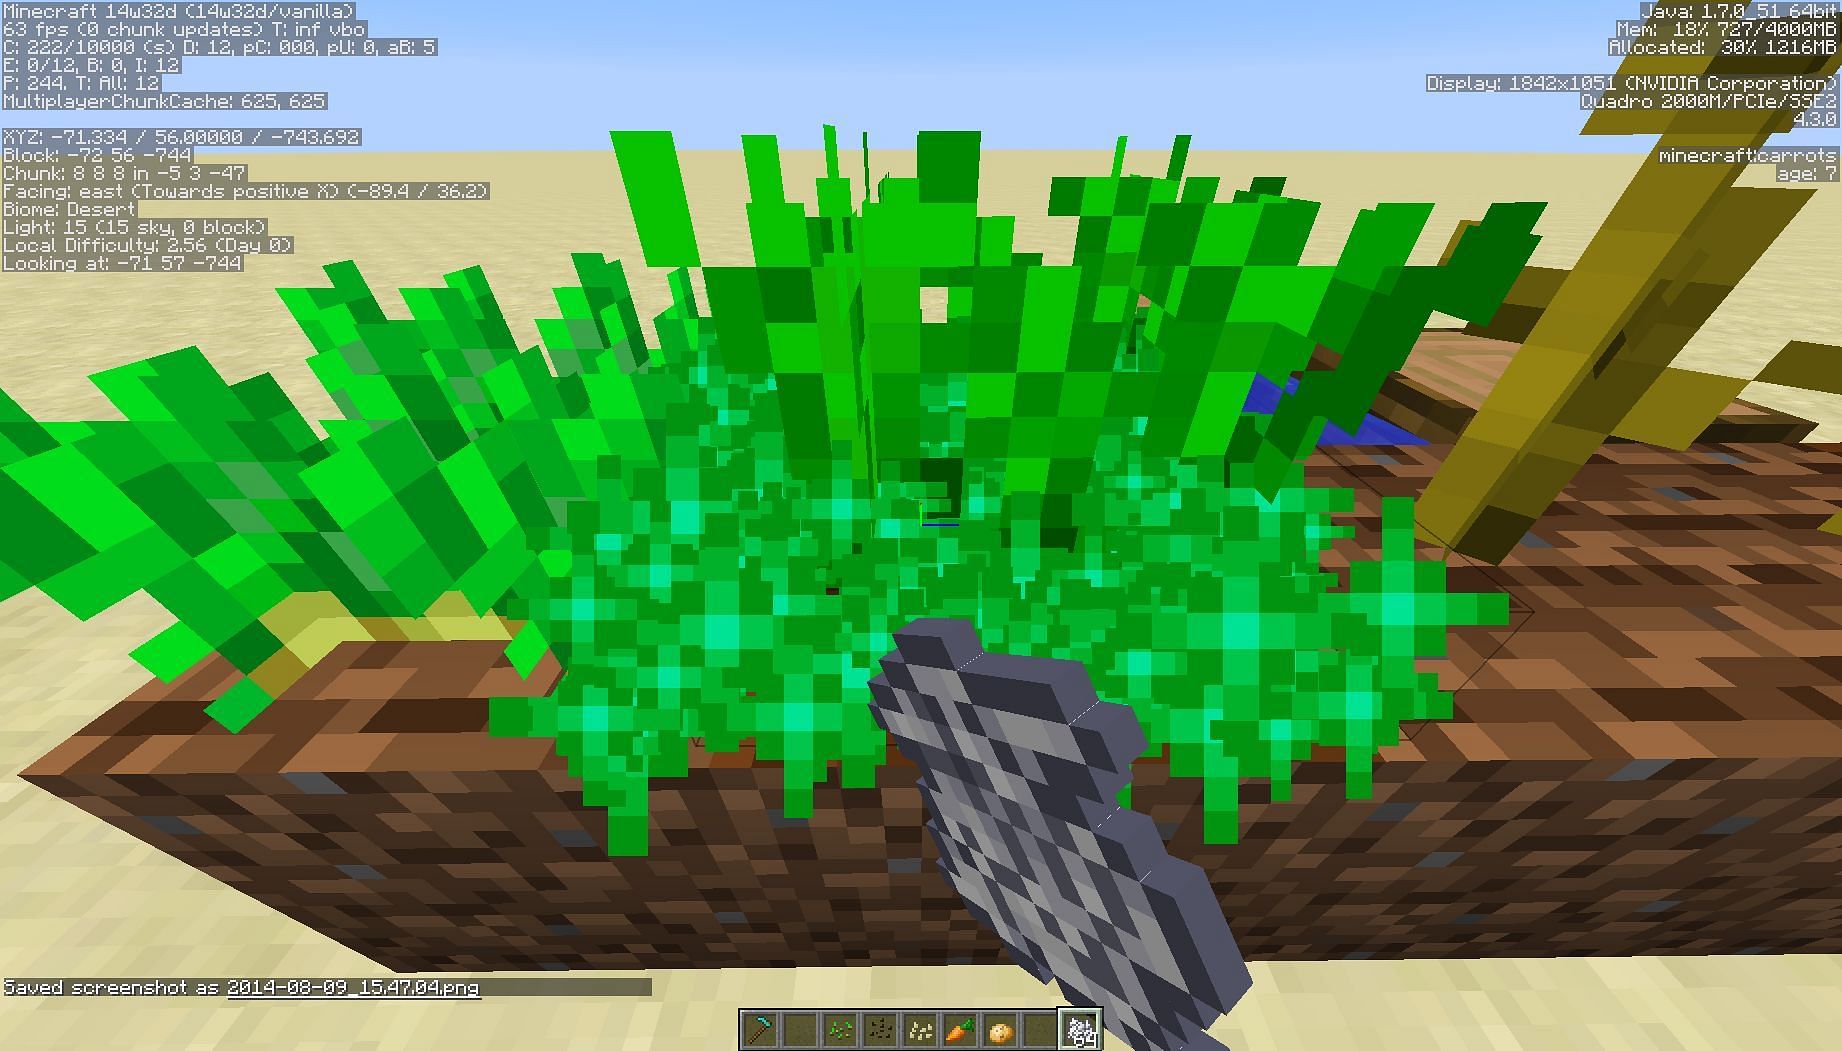 Bone meal can be used to quickly add natural vegetation to any area (Image via Mojang)